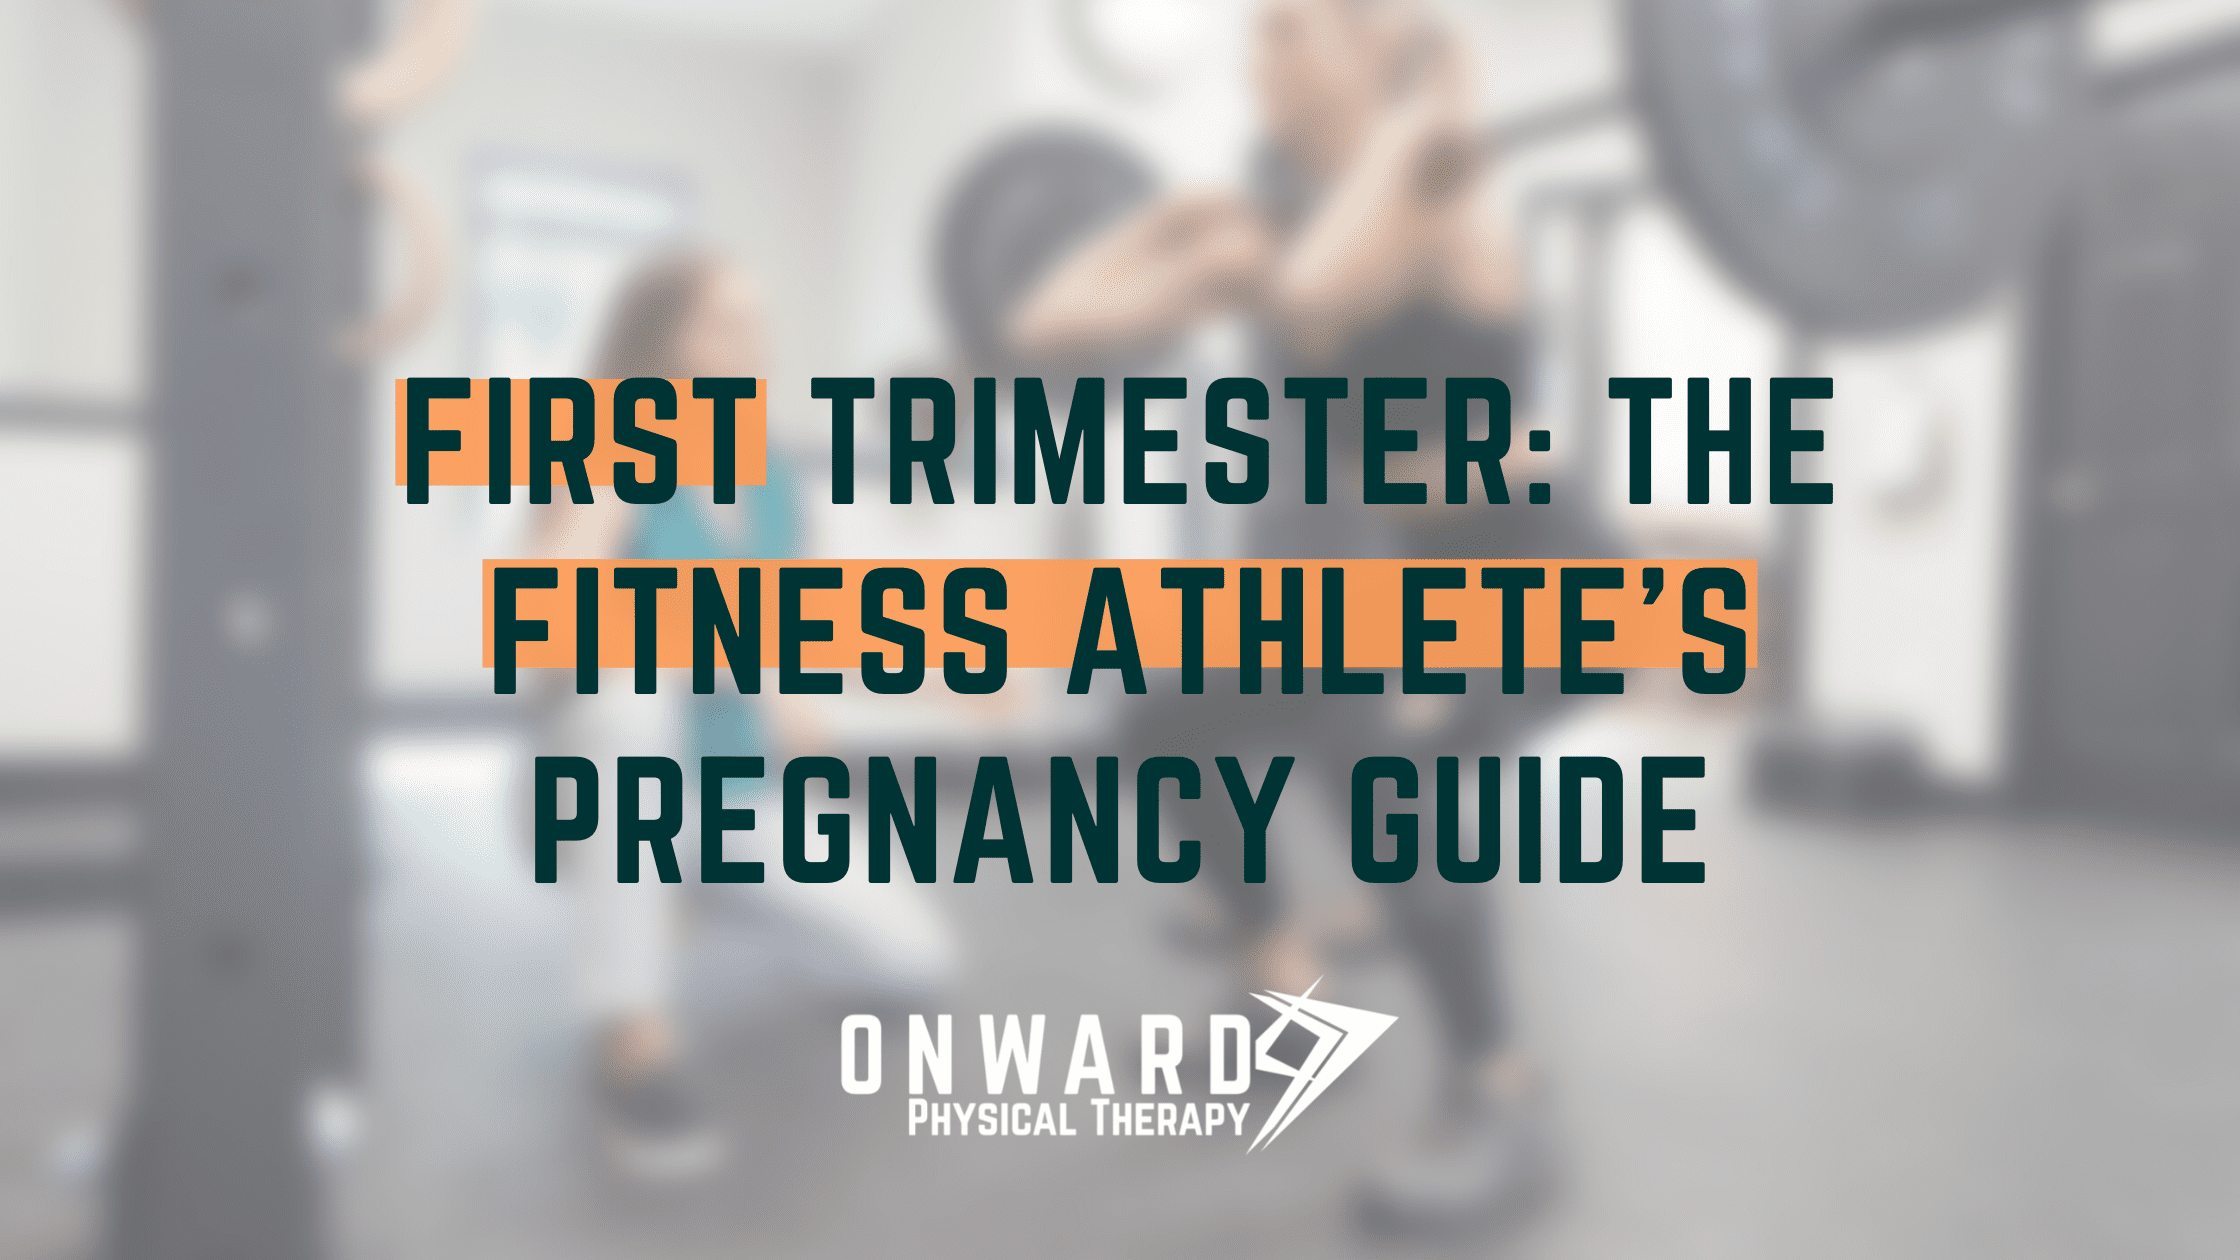 First Trimester: The Fitness Athlete’s Pregnancy Guide